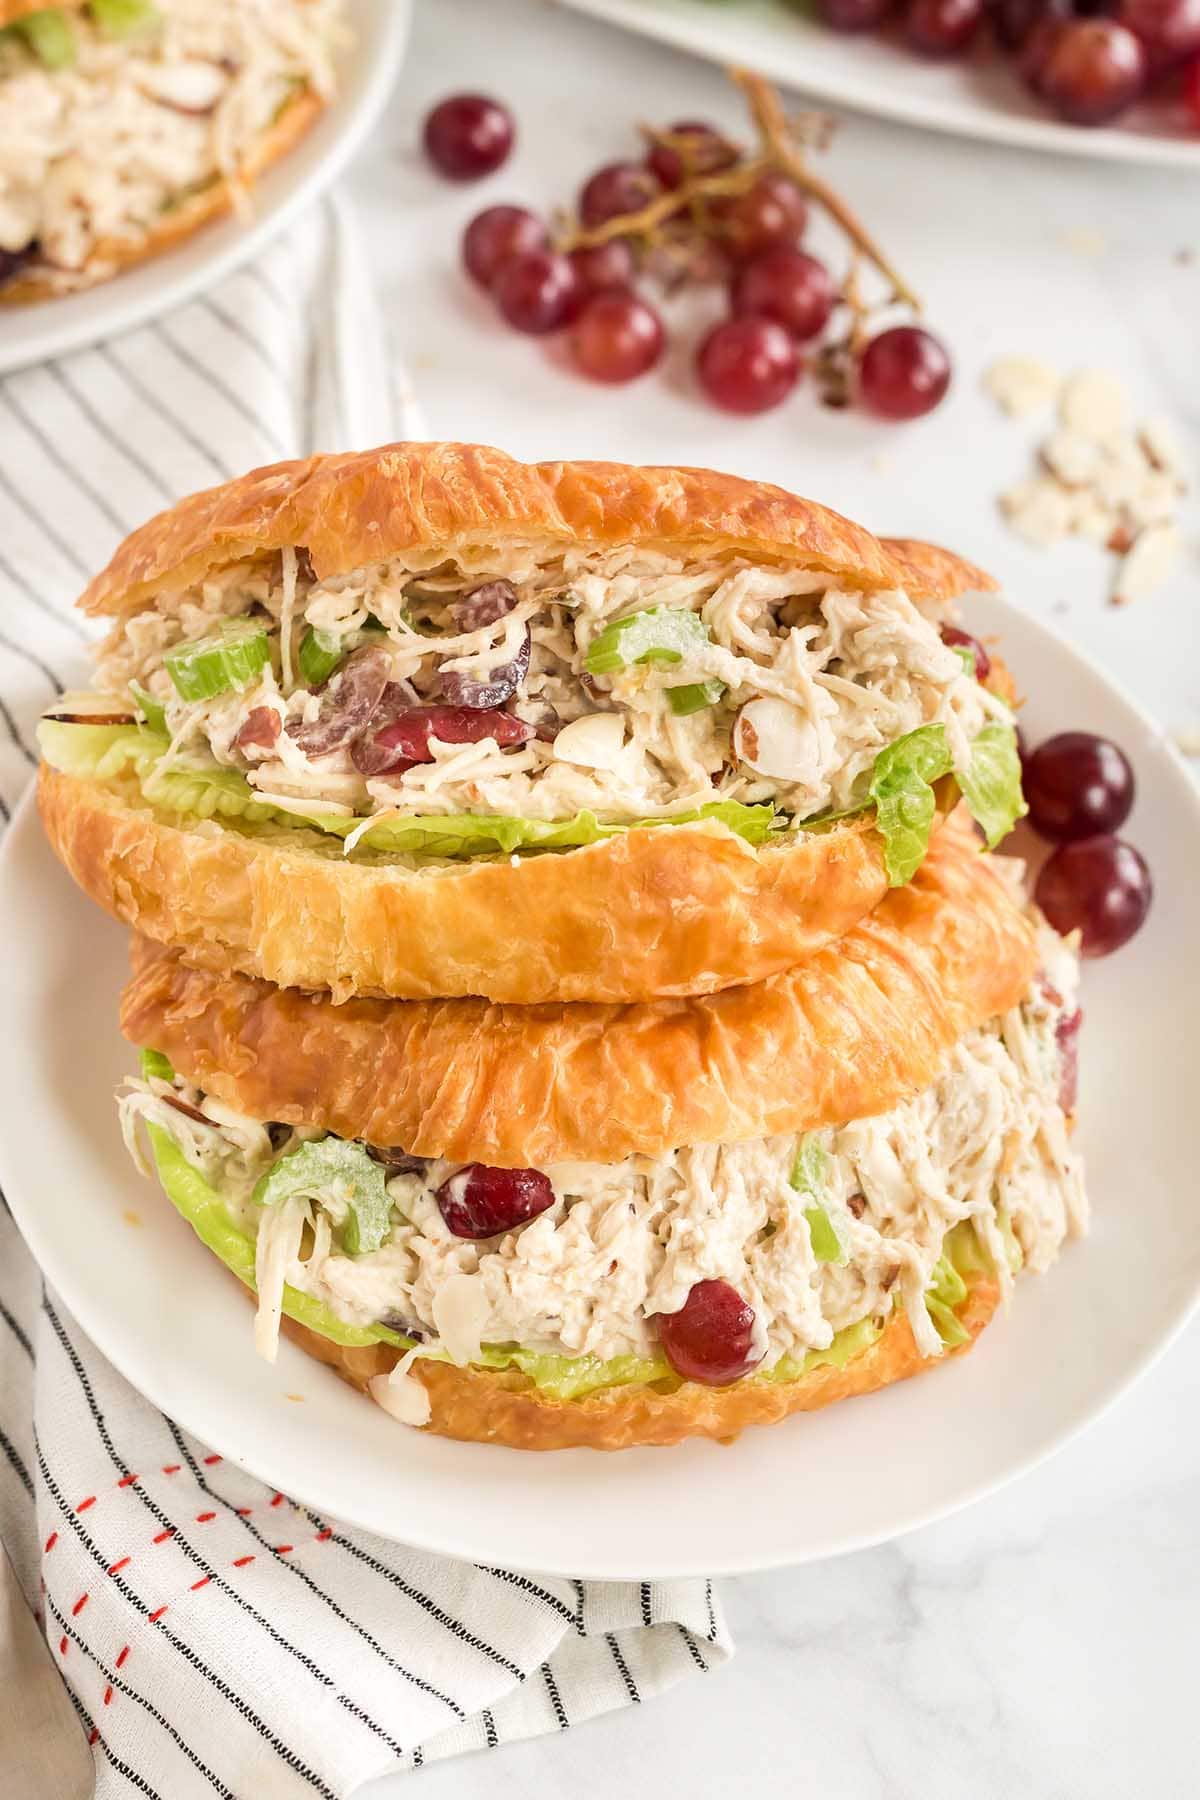 a sandwich made with golden brown croissant filled with Chicken Salad.